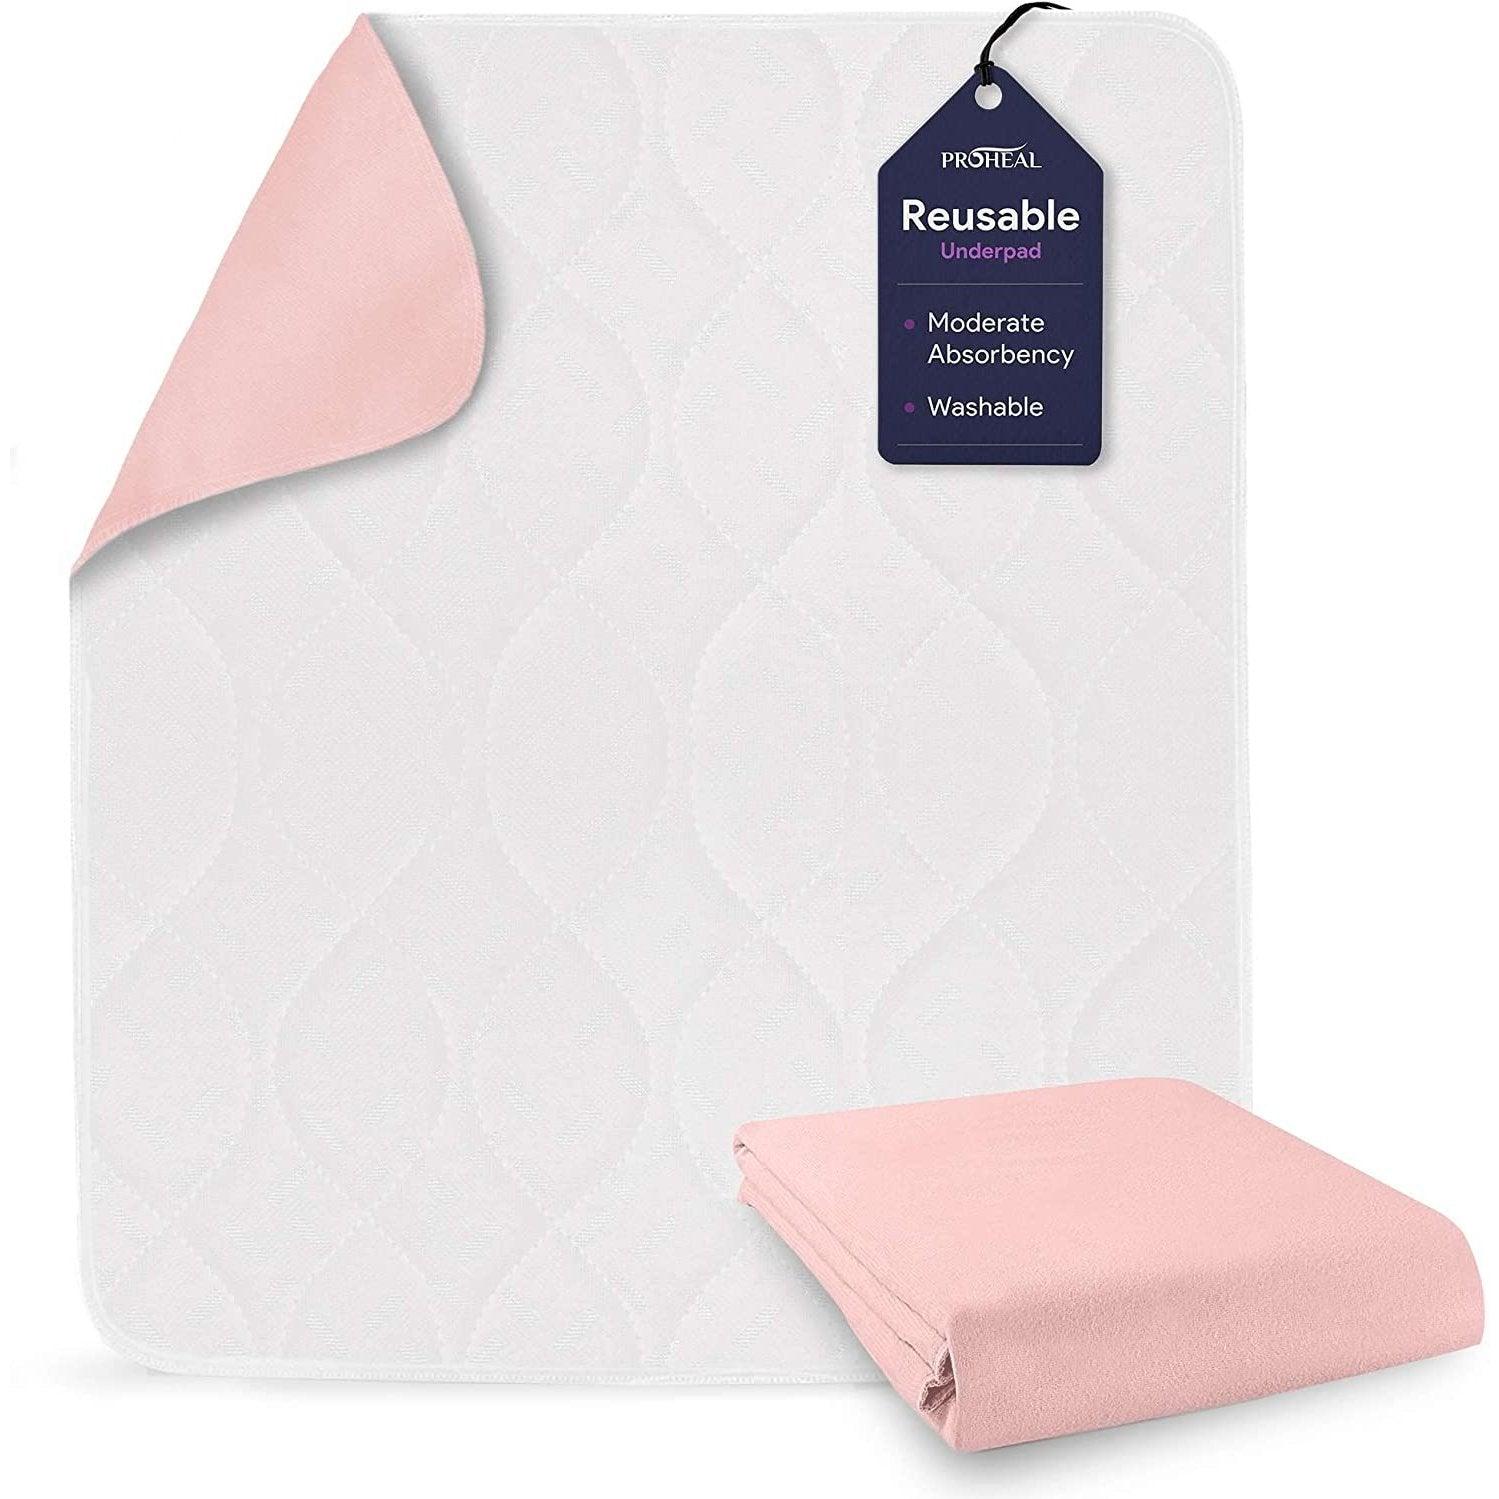 Reusable Adult Bed Pads Underpad Hospital Grade Incontinence